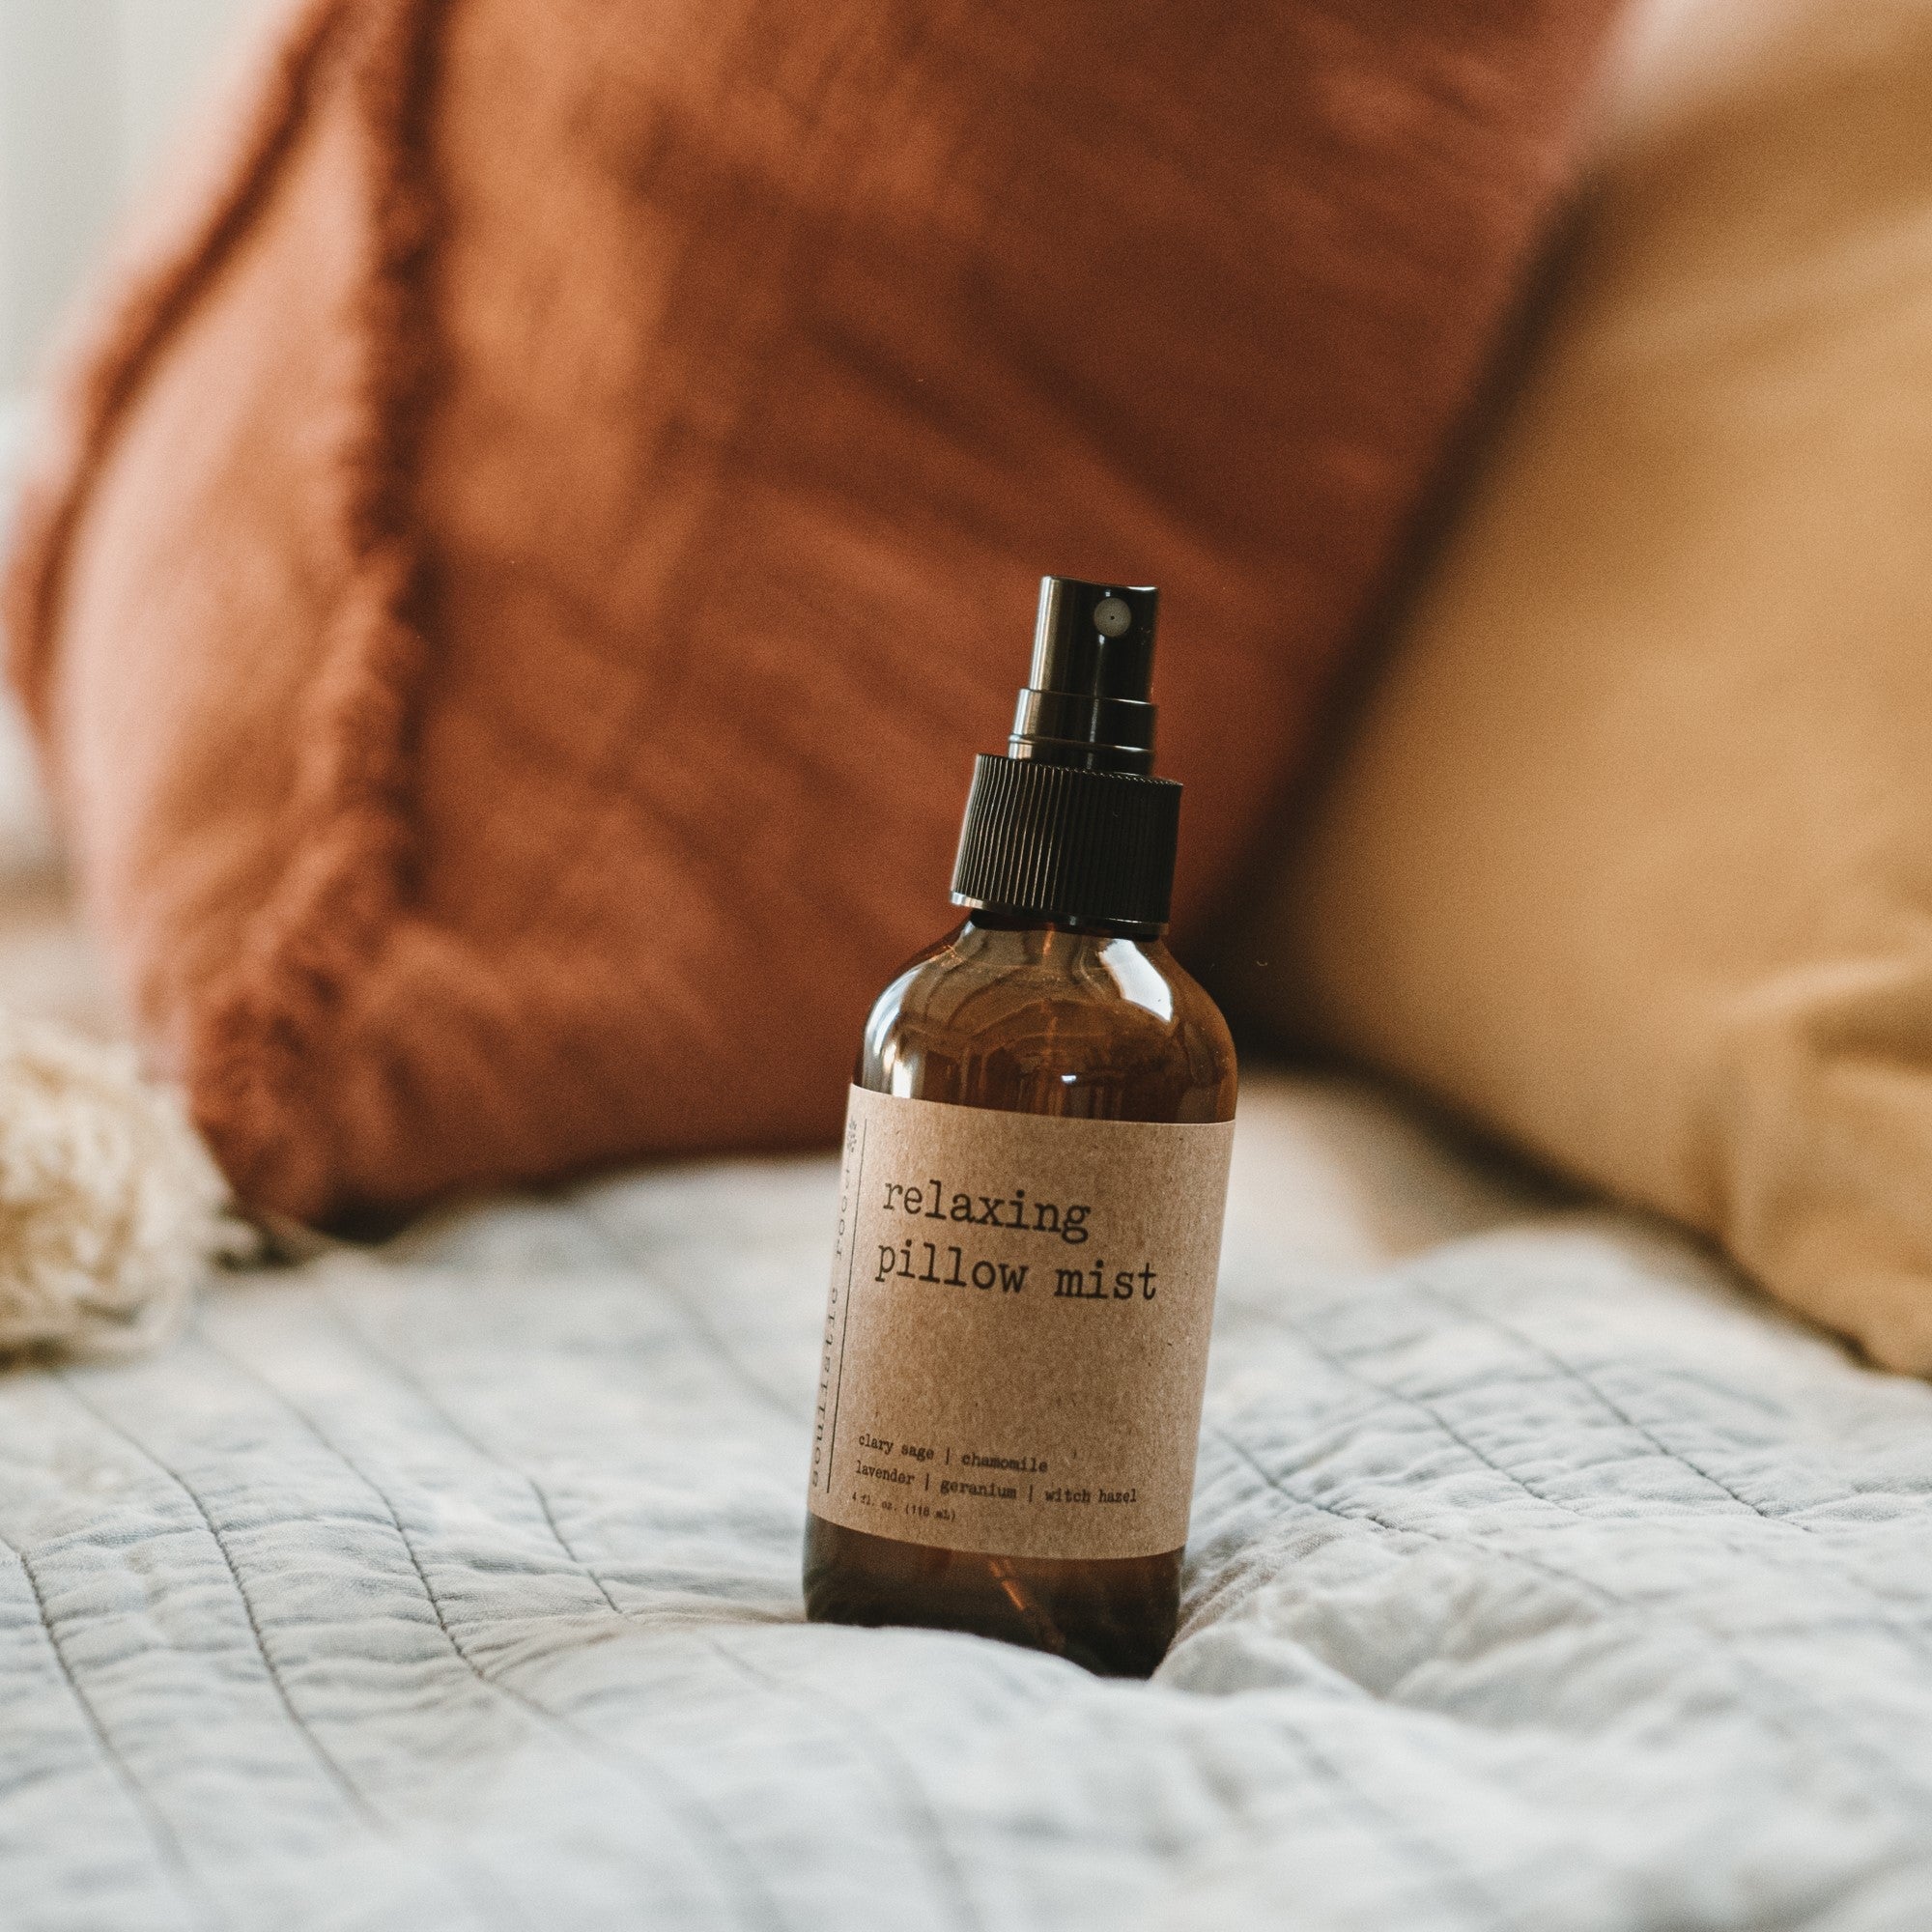 Relaxing pillow mist spray in an amber glass bottle on a bed with burnt orange pillows.